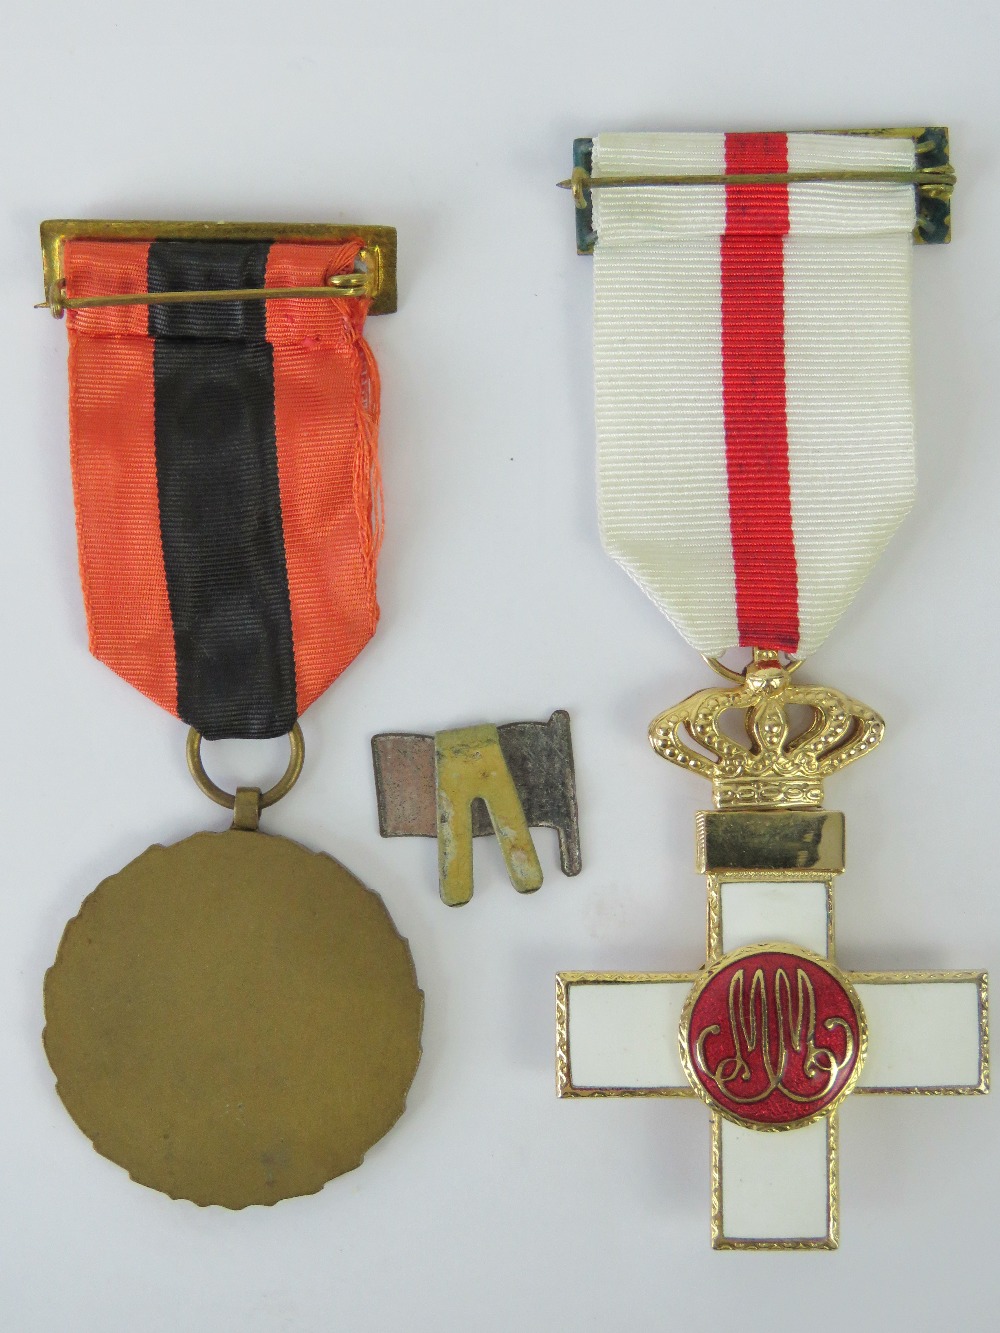 A Spanish Civil War Order of Military Me - Image 2 of 2